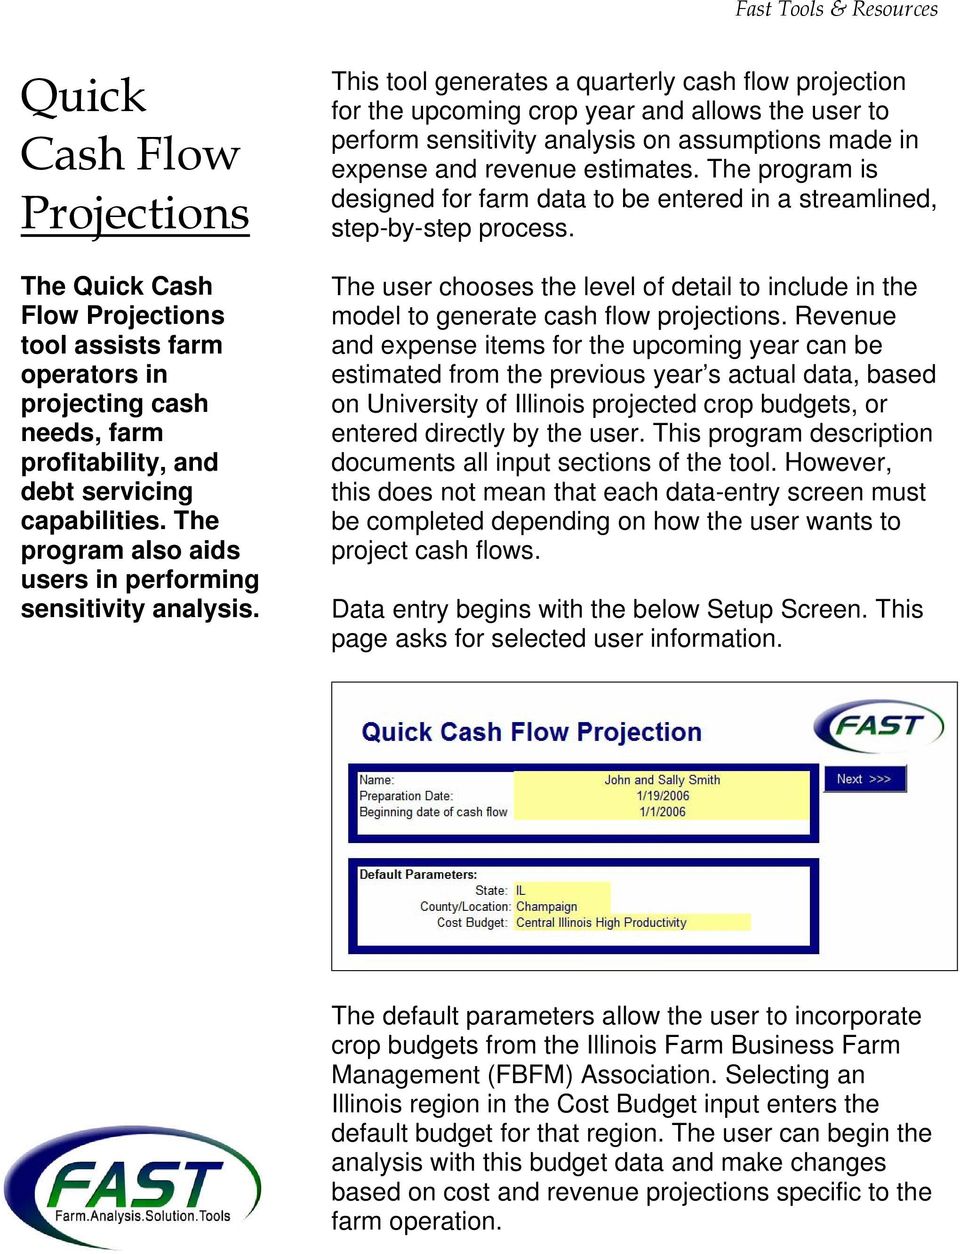 This tool generates a quarterly cash flow projection for the upcoming crop year and allows the user to perform sensitivity analysis on assumptions made in expense and revenue estimates.